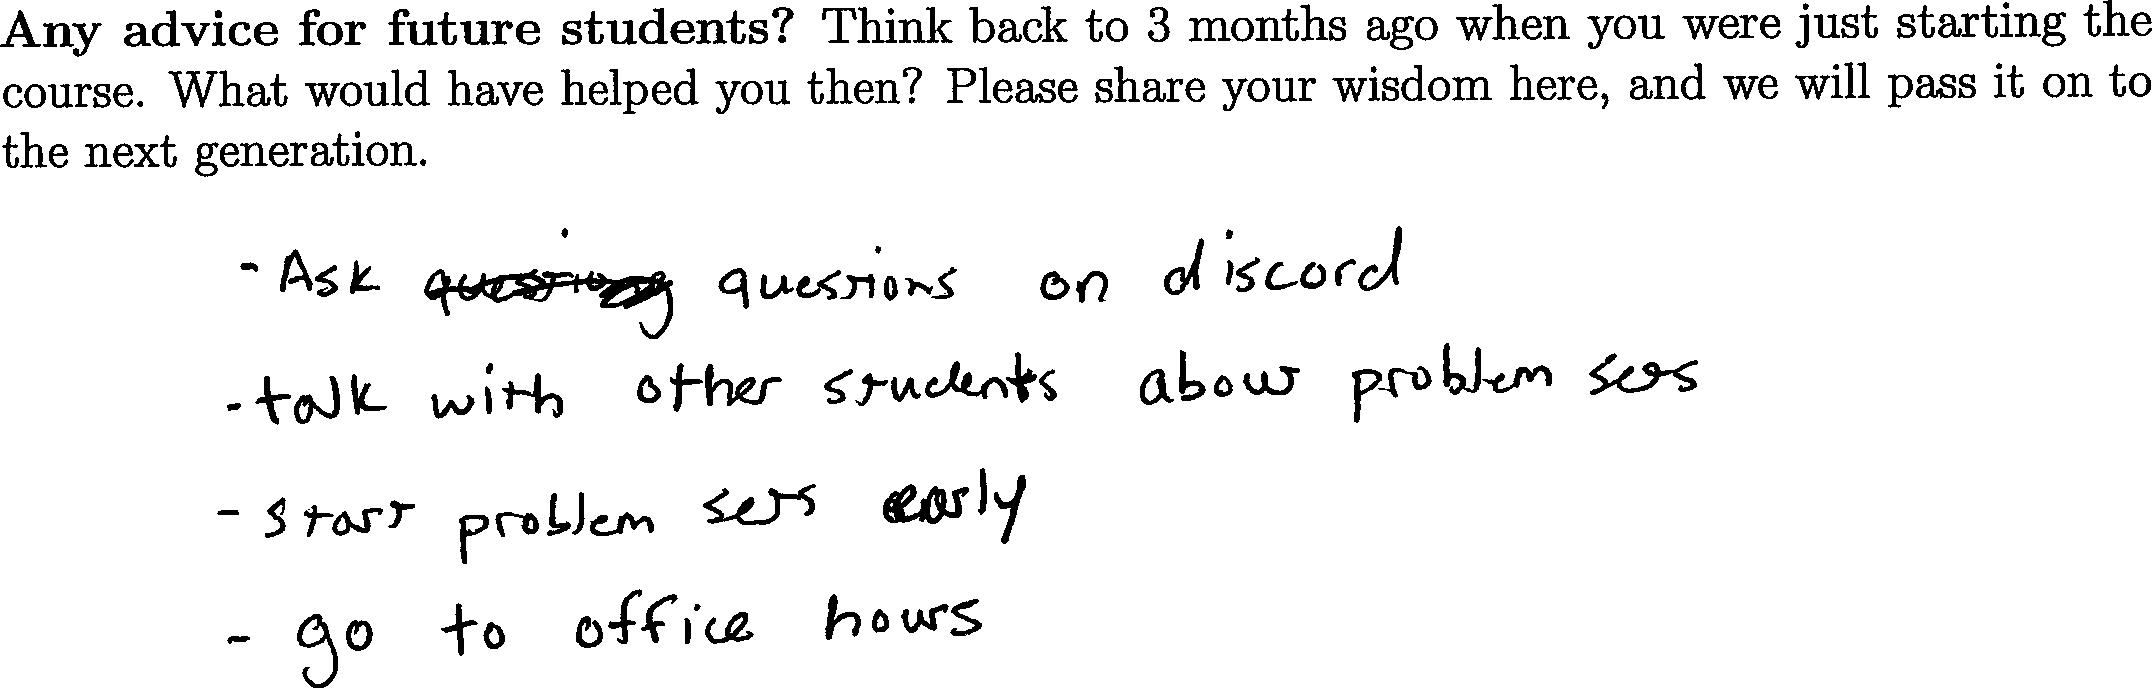 Ask questions on discord. talk with other students about problem sets. start problem sets early. go to office hours.